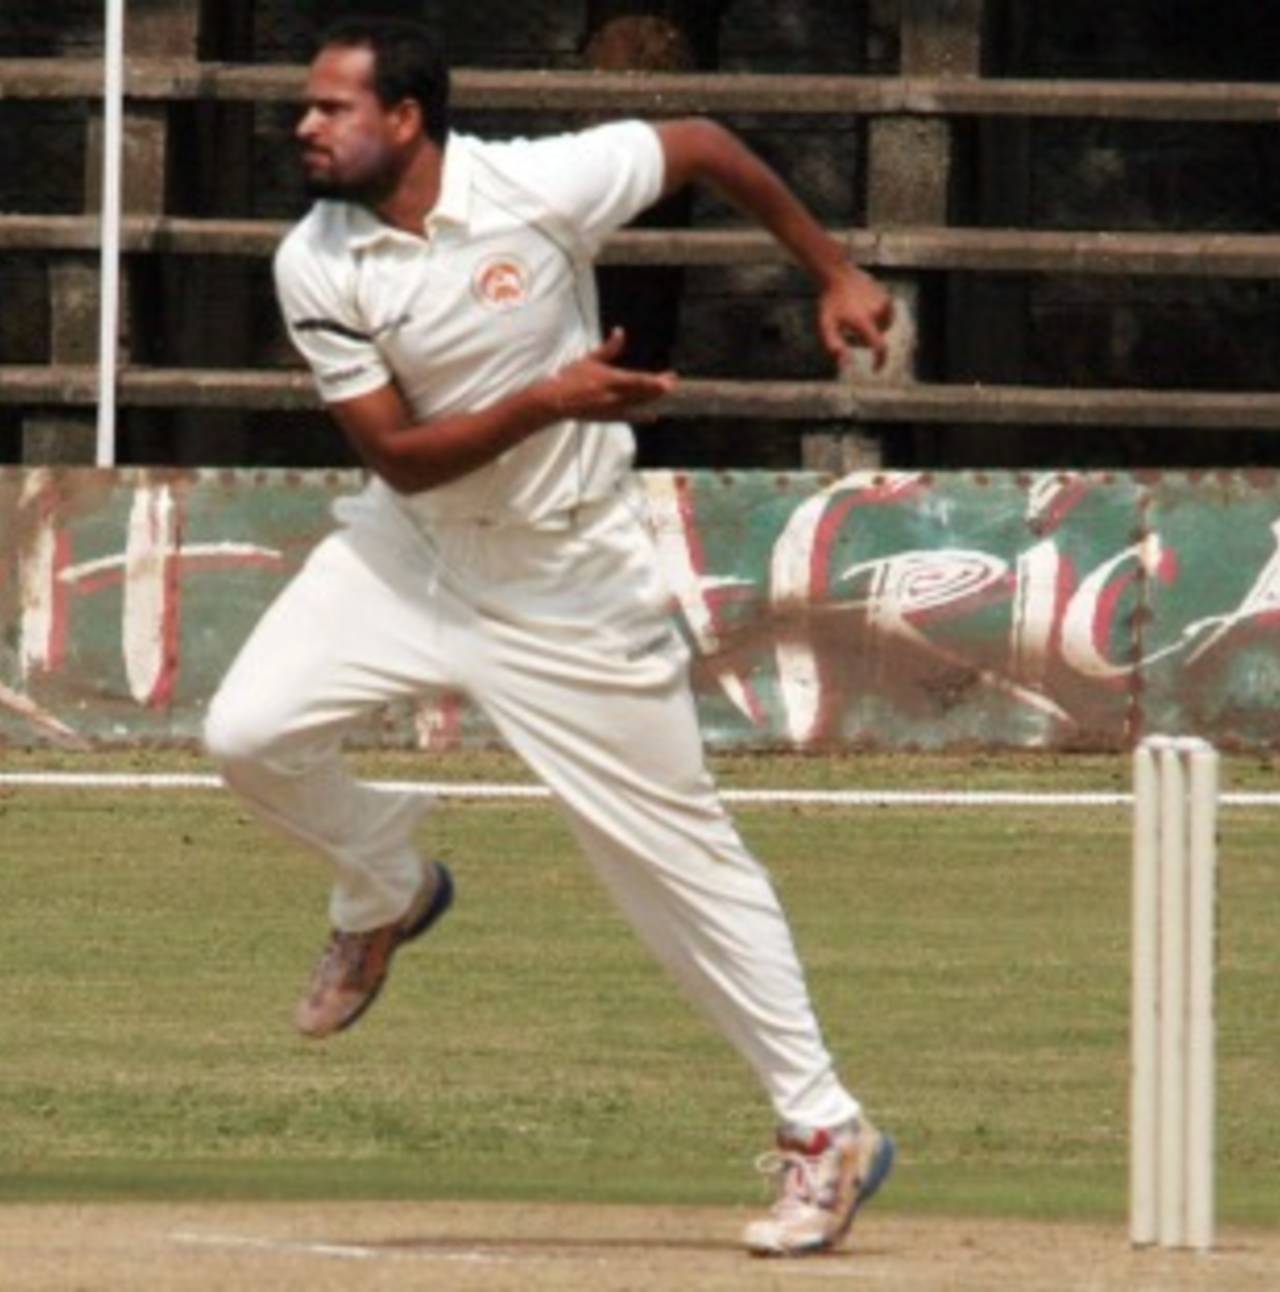 Yusuf Pathan's absence due to his India commitments is a blow, but also a chance for the others to step up&nbsp;&nbsp;&bull;&nbsp;&nbsp;Cricket Kenya